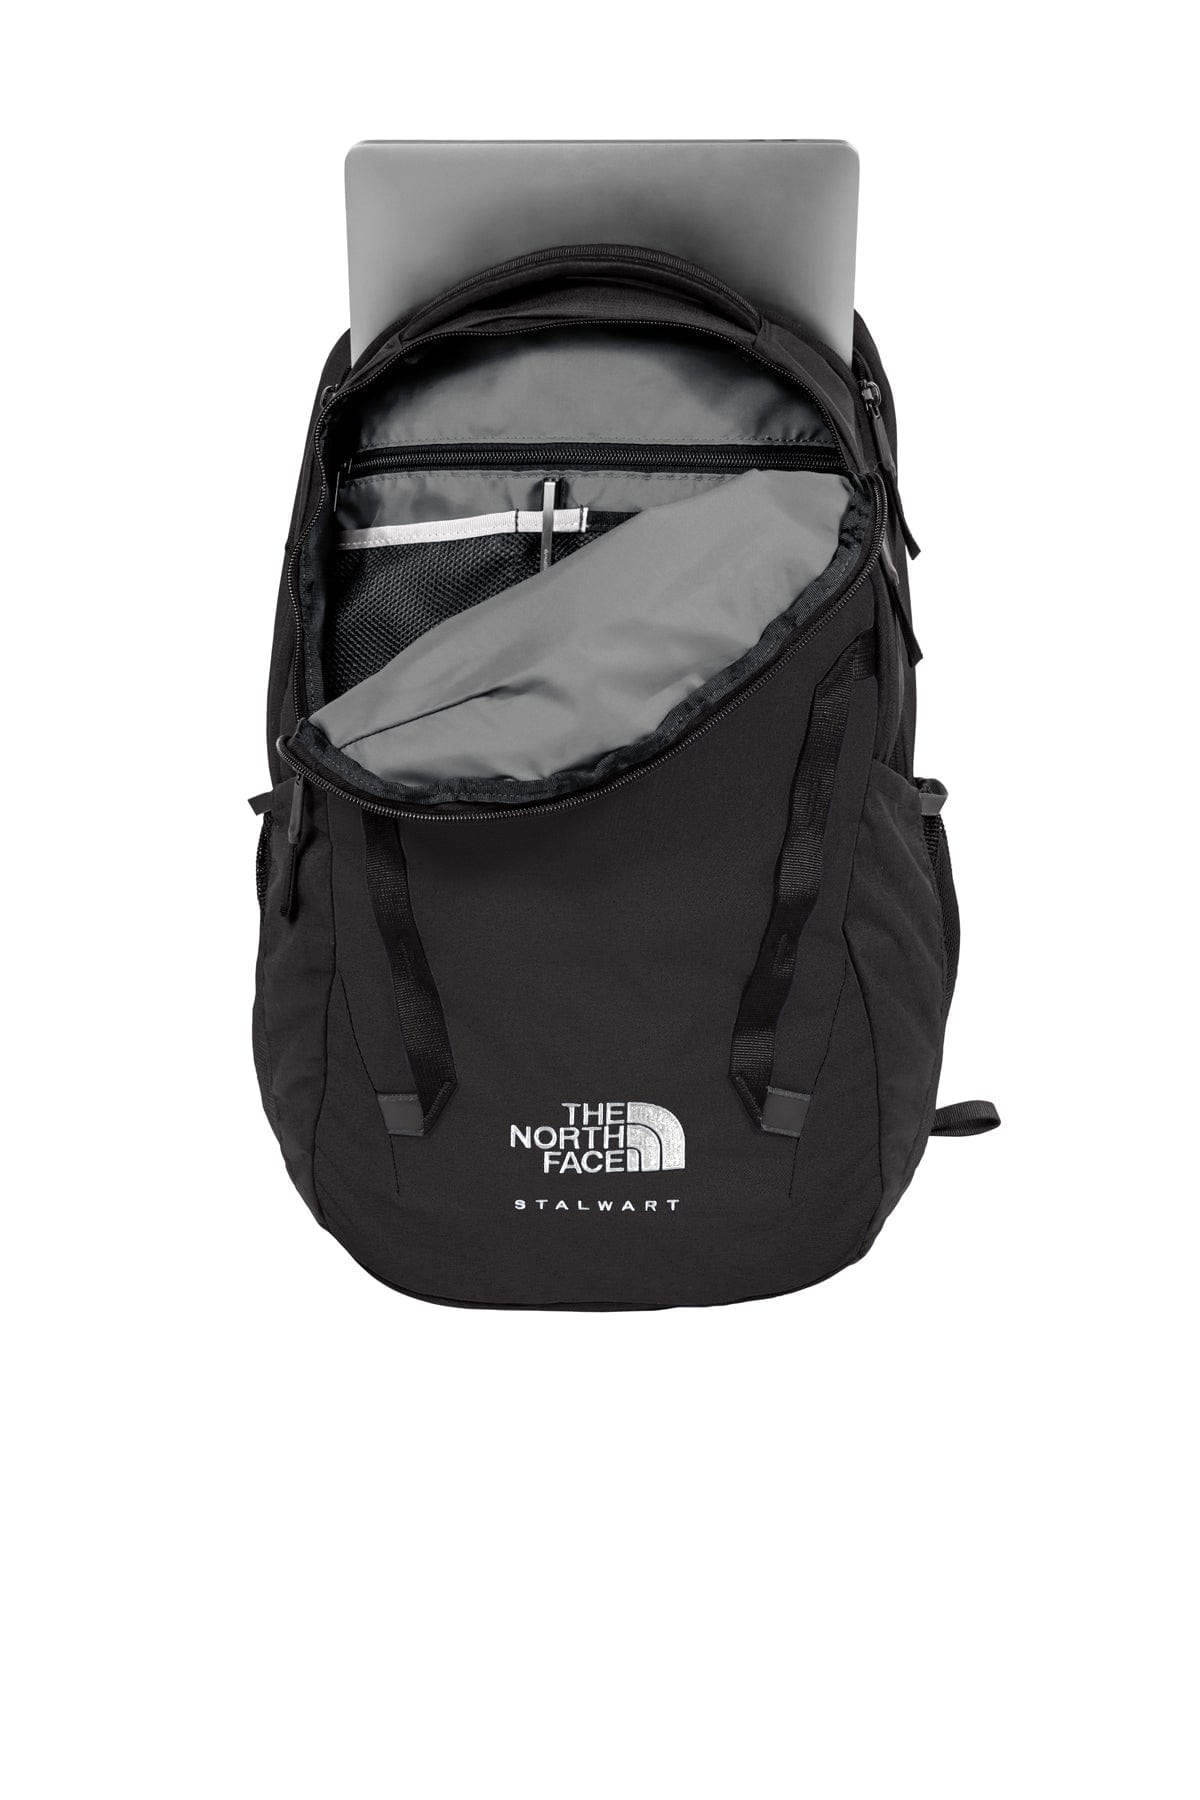 Custom The North Face Stalwart Backpack